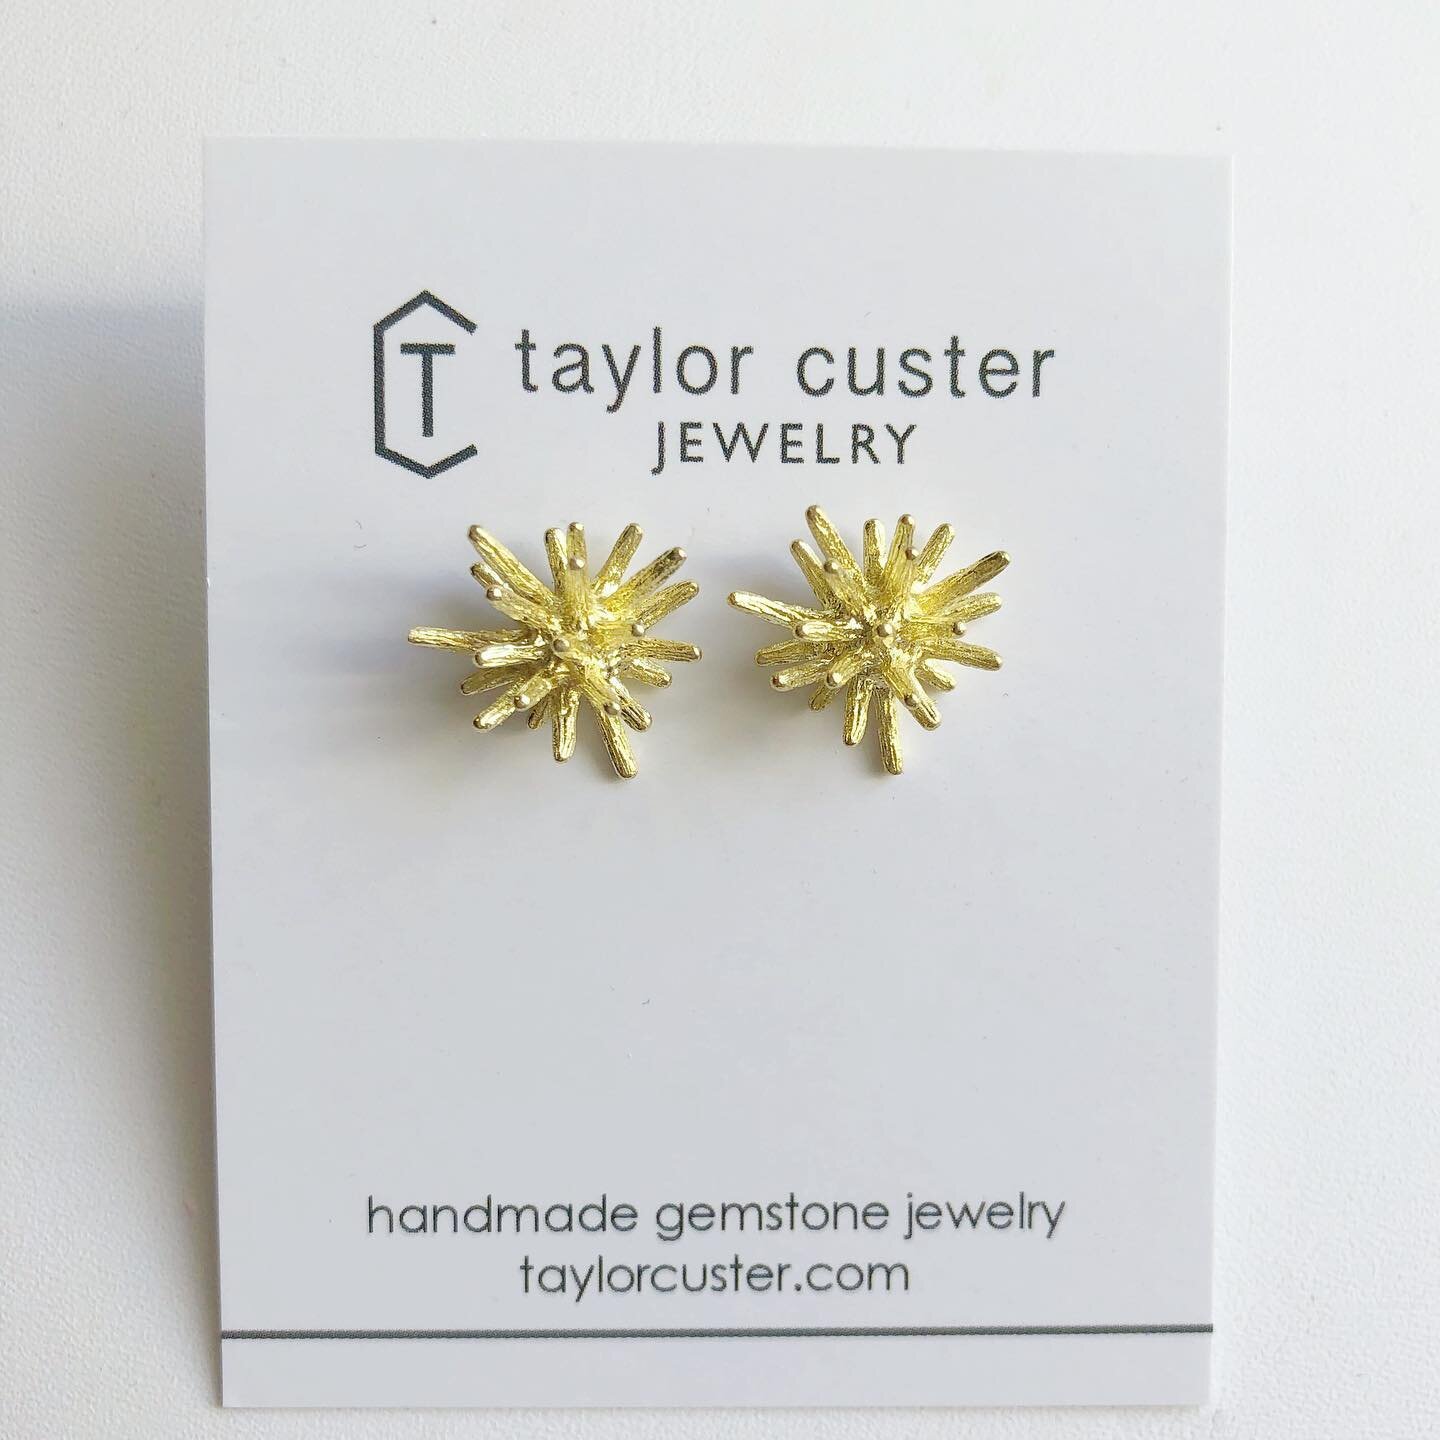 Make a statement while still wearing a stud earring. Starburst studs are brass and 13mm. $18 each, 3 available. To purchase, comment sold.